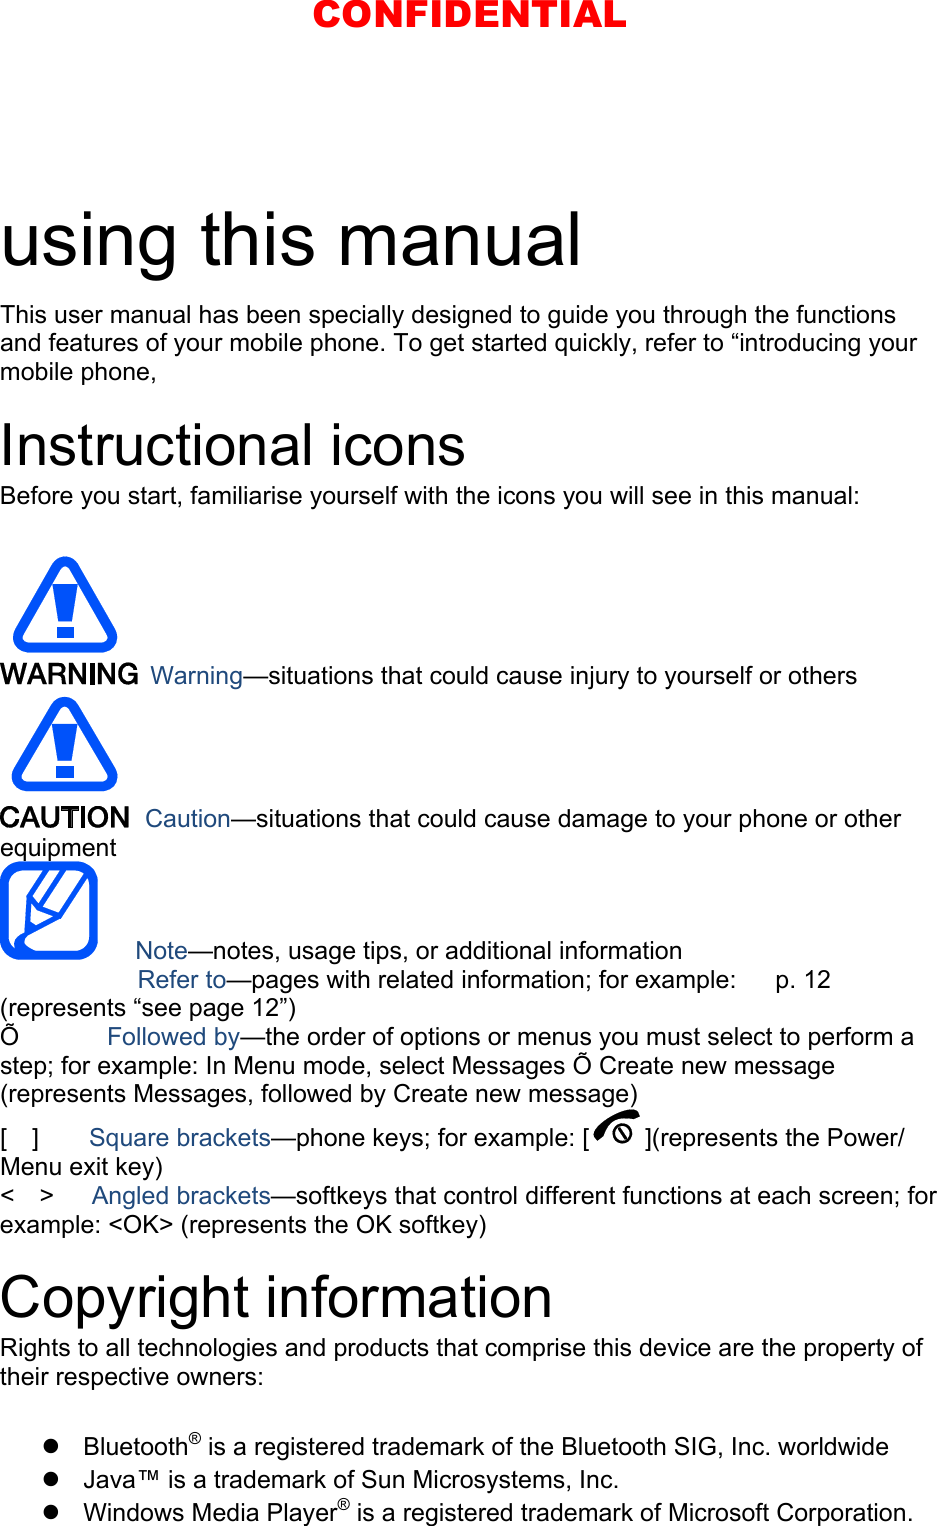  using this manual This user manual has been specially designed to guide you through the functions and features of your mobile phone. To get started quickly, refer to “introducing your mobile phone,  Instructional icons Before you start, familiarise yourself with the icons you will see in this manual:     Warning—situations that could cause injury to yourself or others  Caution—situations that could cause damage to your phone or other equipment    Note—notes, usage tips, or additional information   　       Refer to—pages with related information; for example:   p. 12 　(represents “see page 12”) Õ       Followed by—the order of options or menus you must select to perform a step; for example: In Menu mode, select Messages Õ Create new message (represents Messages, followed by Create new message) [  ]    Square brackets—phone keys; for example: [ ](represents the Power/ Menu exit key) &lt;  &gt;   Angled brackets—softkeys that control different functions at each screen; for example: &lt;OK&gt; (represents the OK softkey)  Copyright information Rights to all technologies and products that comprise this device are the property of their respective owners:   Bluetooth® is a registered trademark of the Bluetooth SIG, Inc. worldwide   Java™ is a trademark of Sun Microsystems, Inc.  Windows Media Player® is a registered trademark of Microsoft Corporation.  CONFIDENTIAL